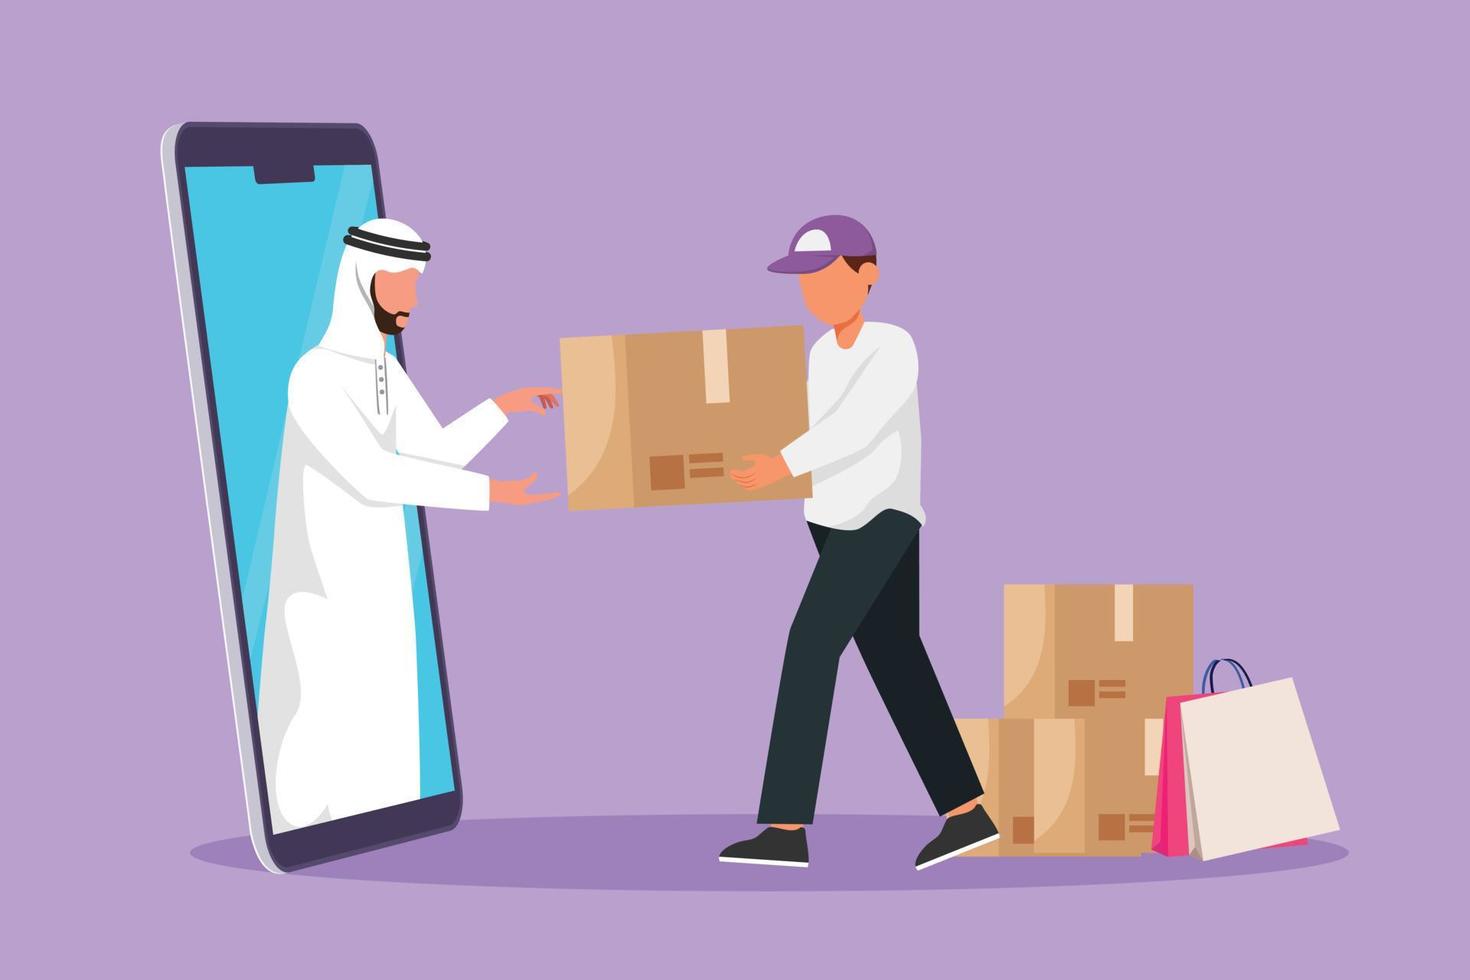 Cartoon flat style drawing Arab man customer receives boxed package, through smartphone screen from male courier. Online delivery service. Online store technology. Graphic design vector illustration